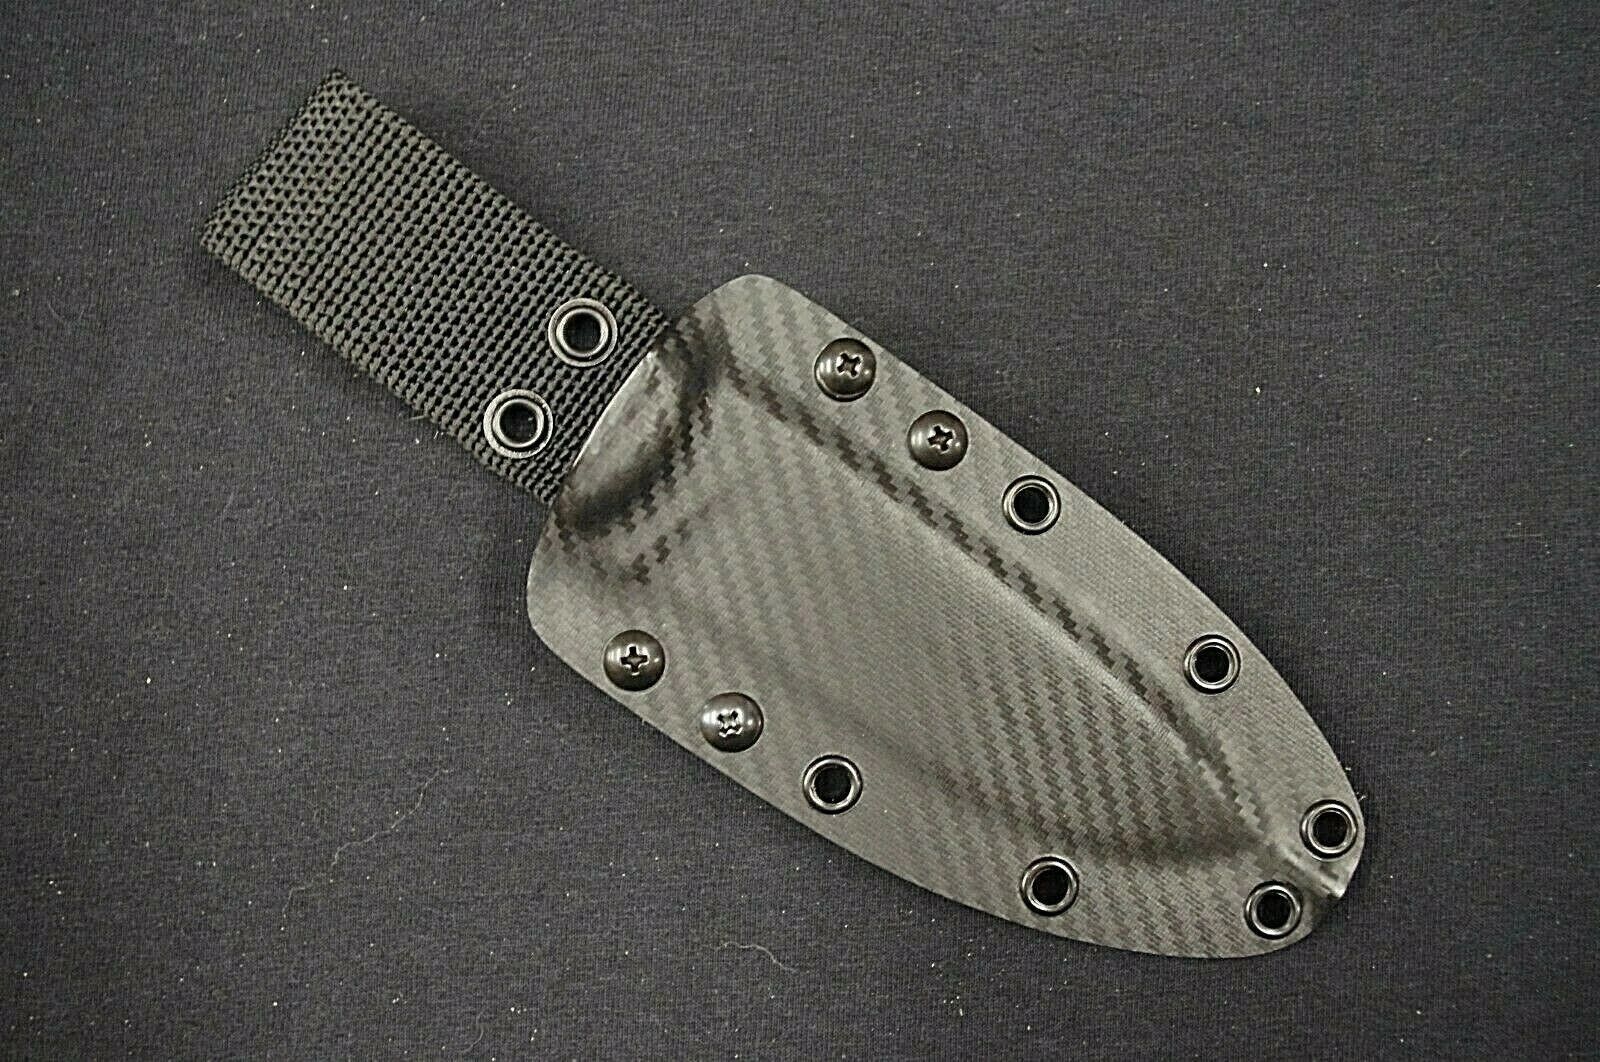 TOPS KNIVES HOG 4.5 CUSTOM KYDEX SHEATH BUILT YOUR WAY (KNIFE NOT INCLUDED)